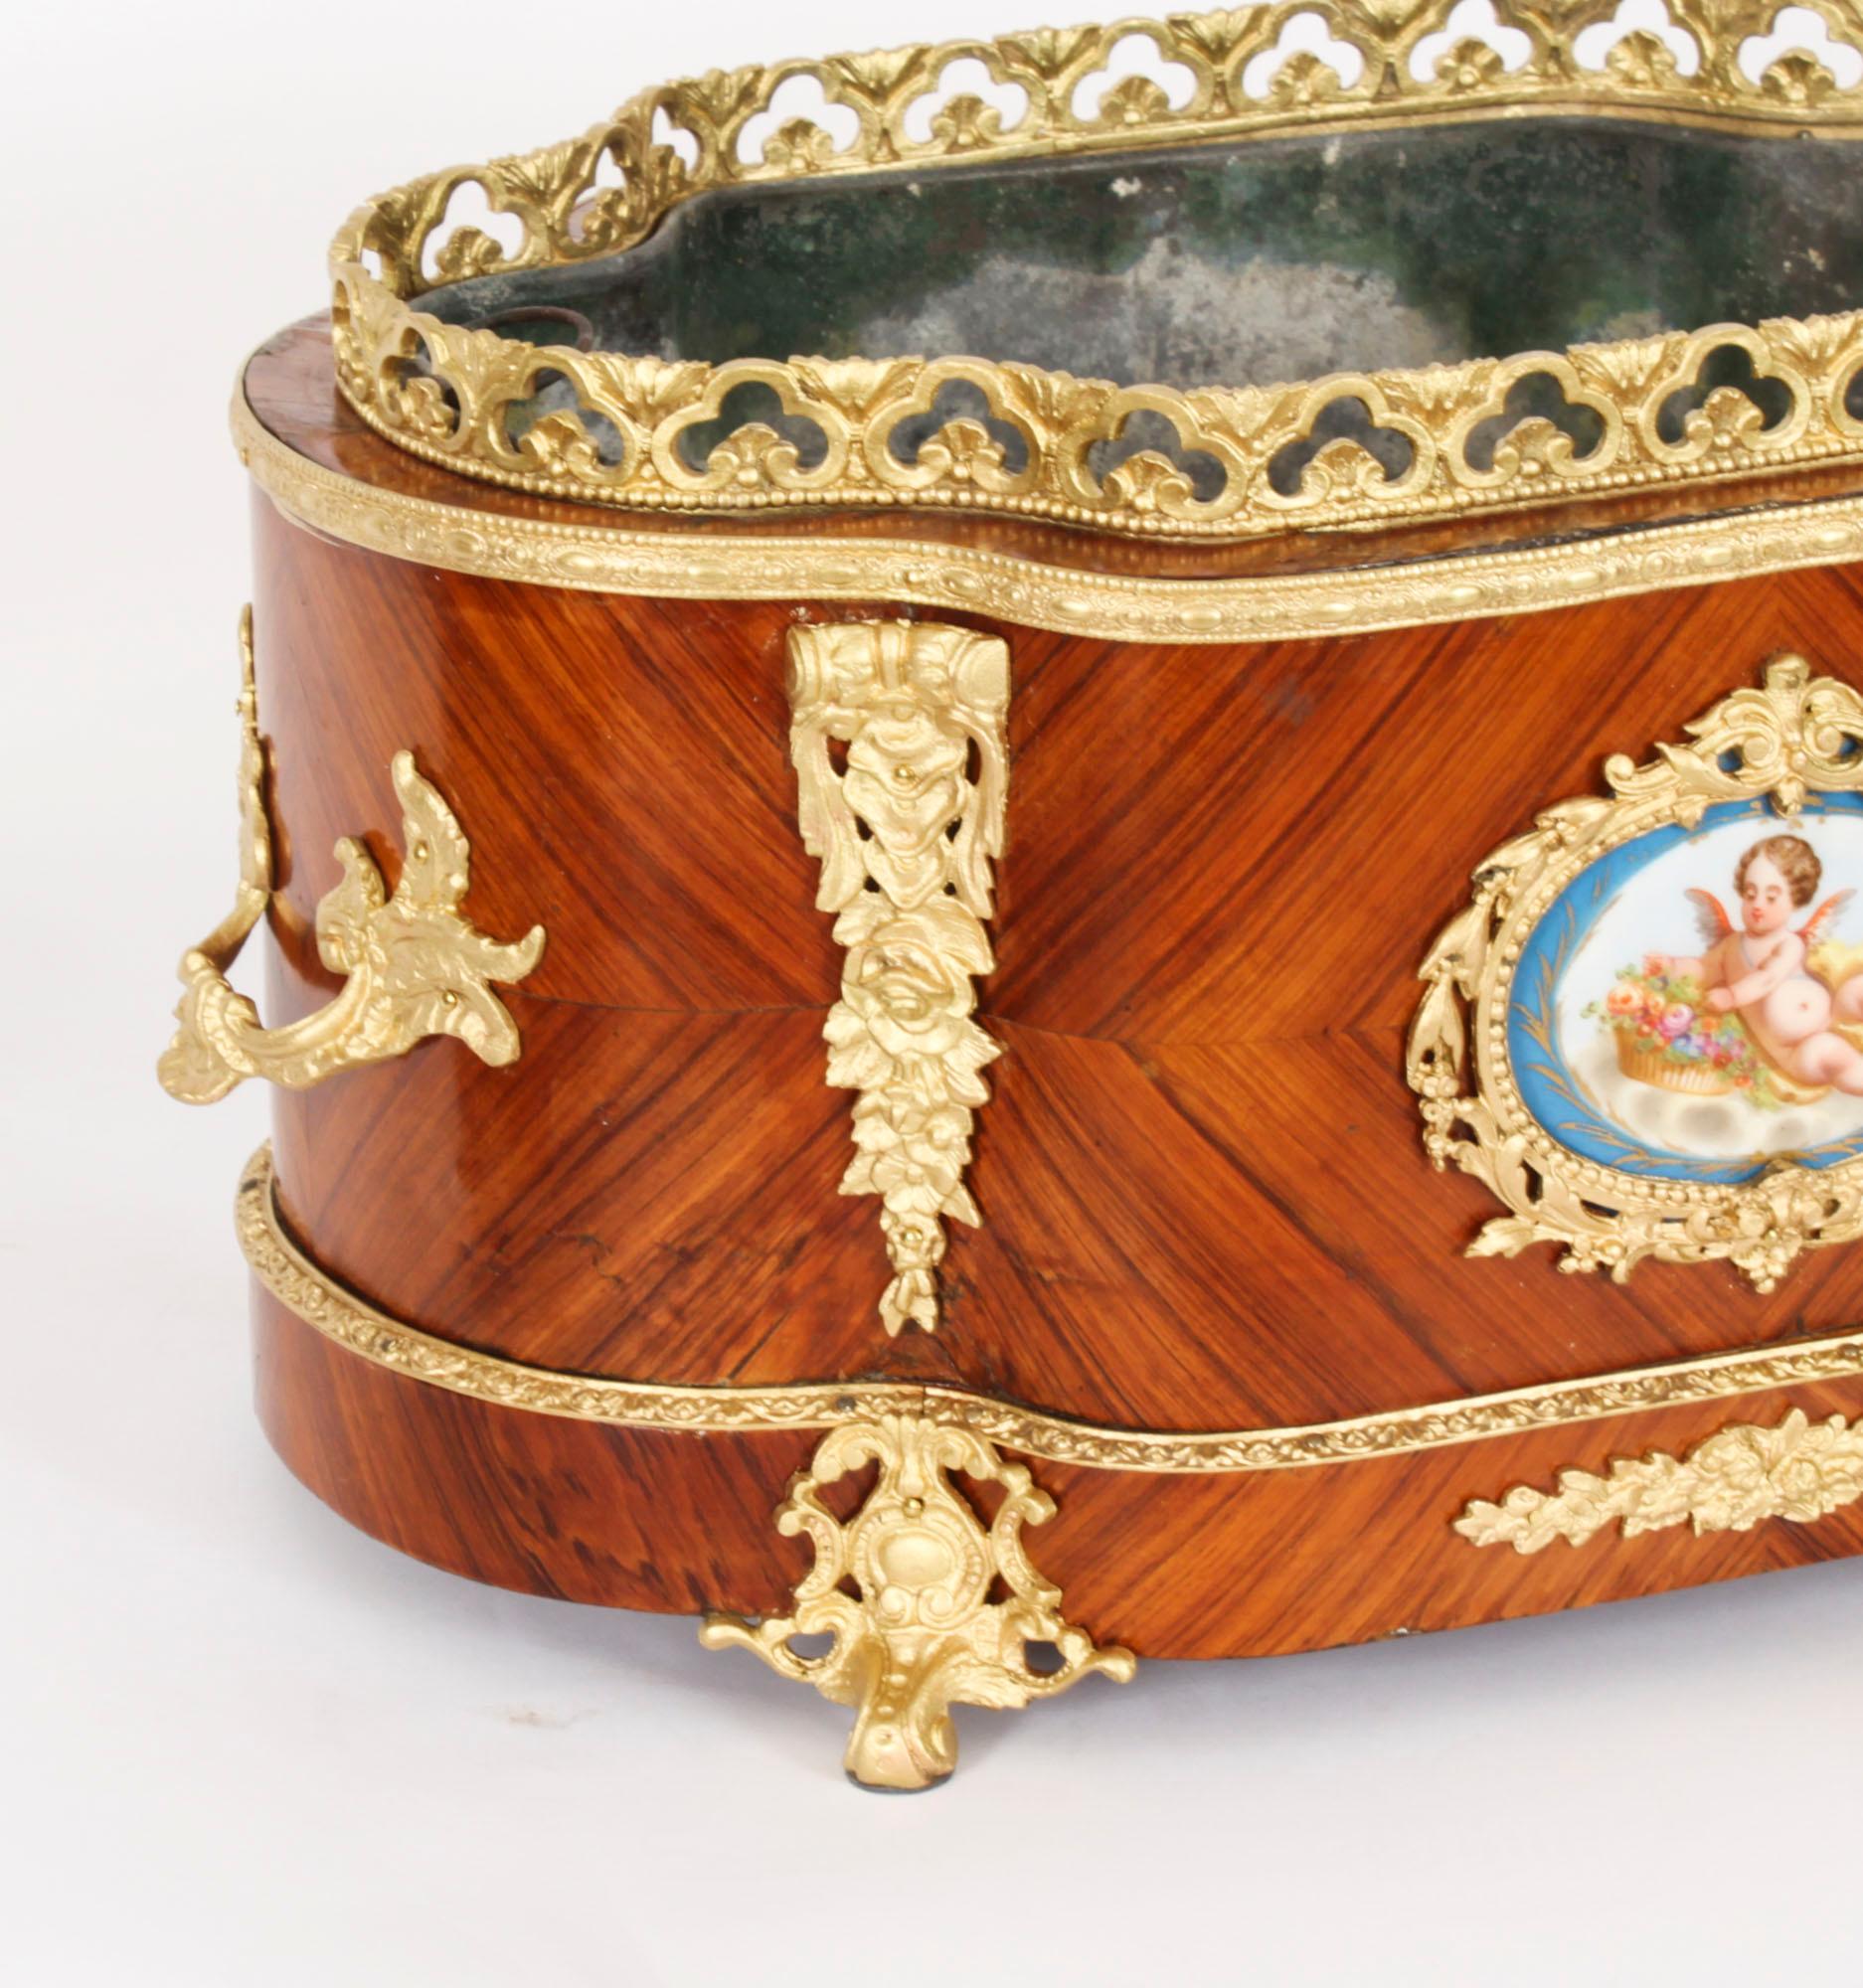 Antique French Sevres Porcelain Ormolu Mounted Planter Jardiniere 19th Century For Sale 9